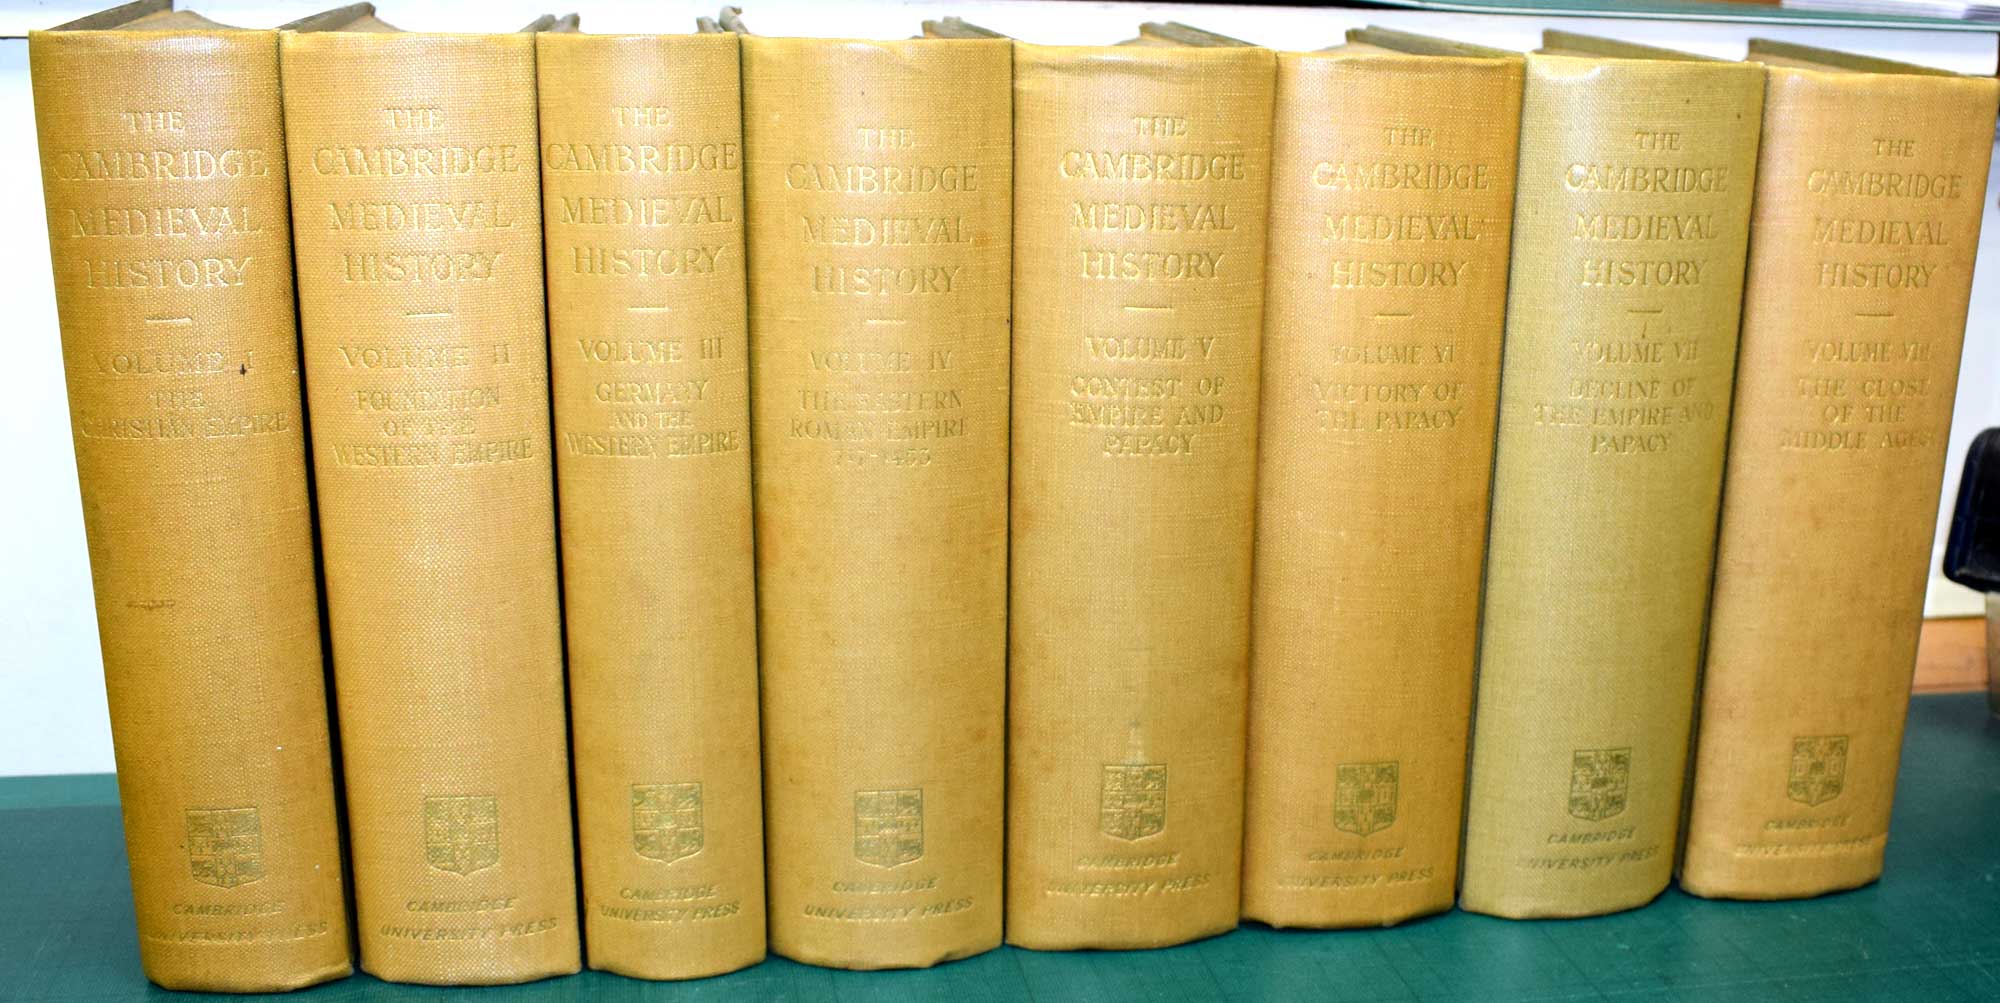 The Cambridge Medieval [Mediaeval] History. 8 volume set. Text only.